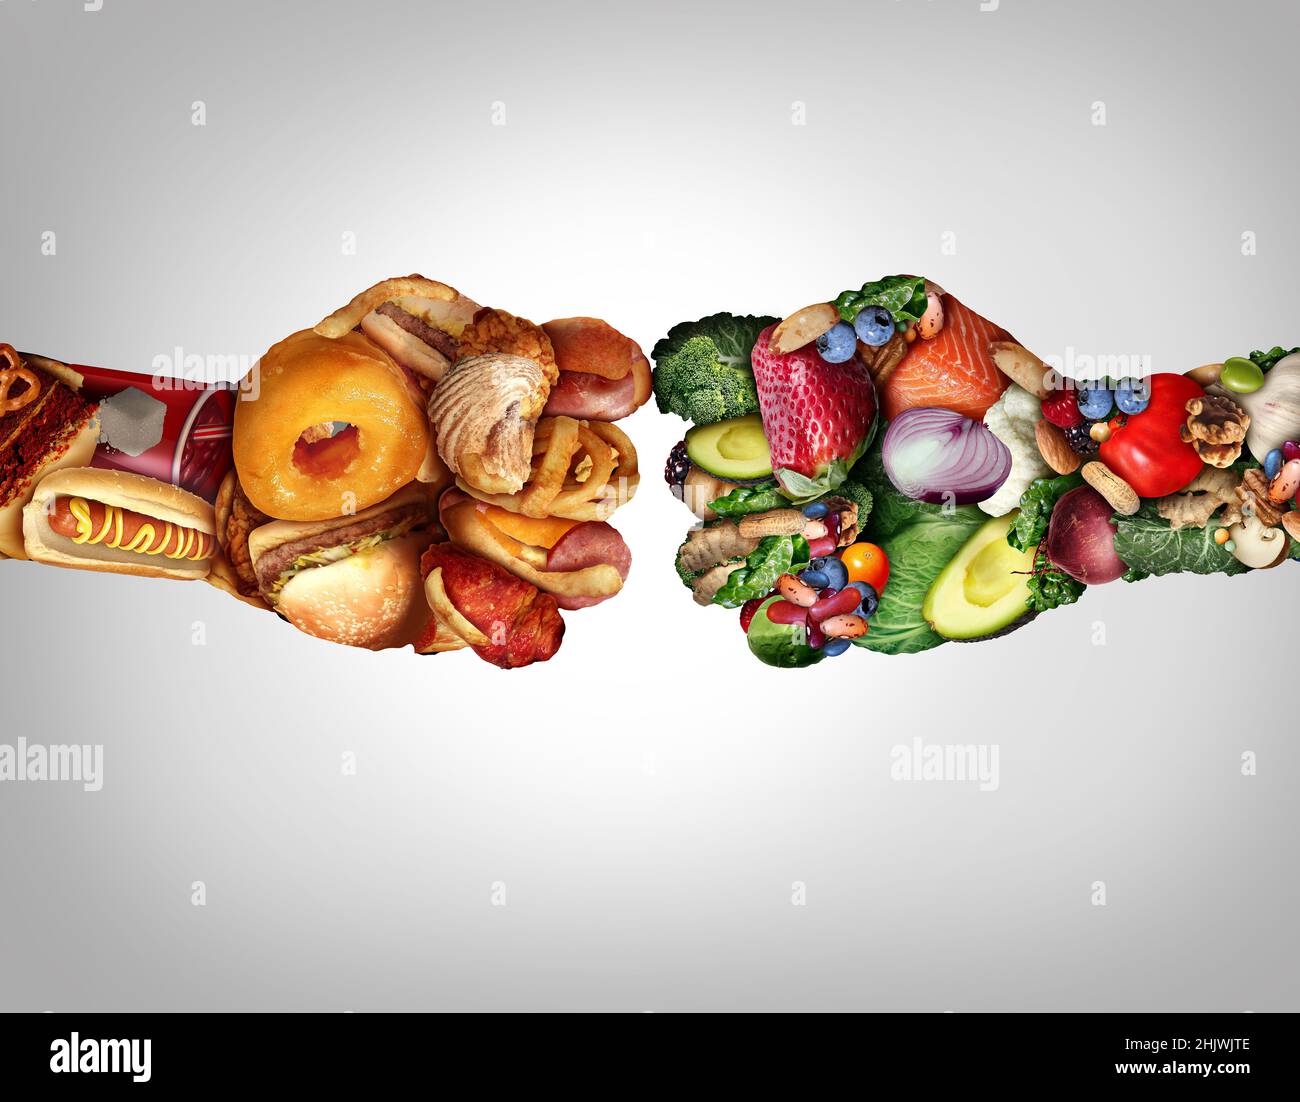 Diet fight and food battle nutrition concept as fresh healthy nutritious foods fighting unhealthy high fat snacks shaped as fists punching. Stock Photo